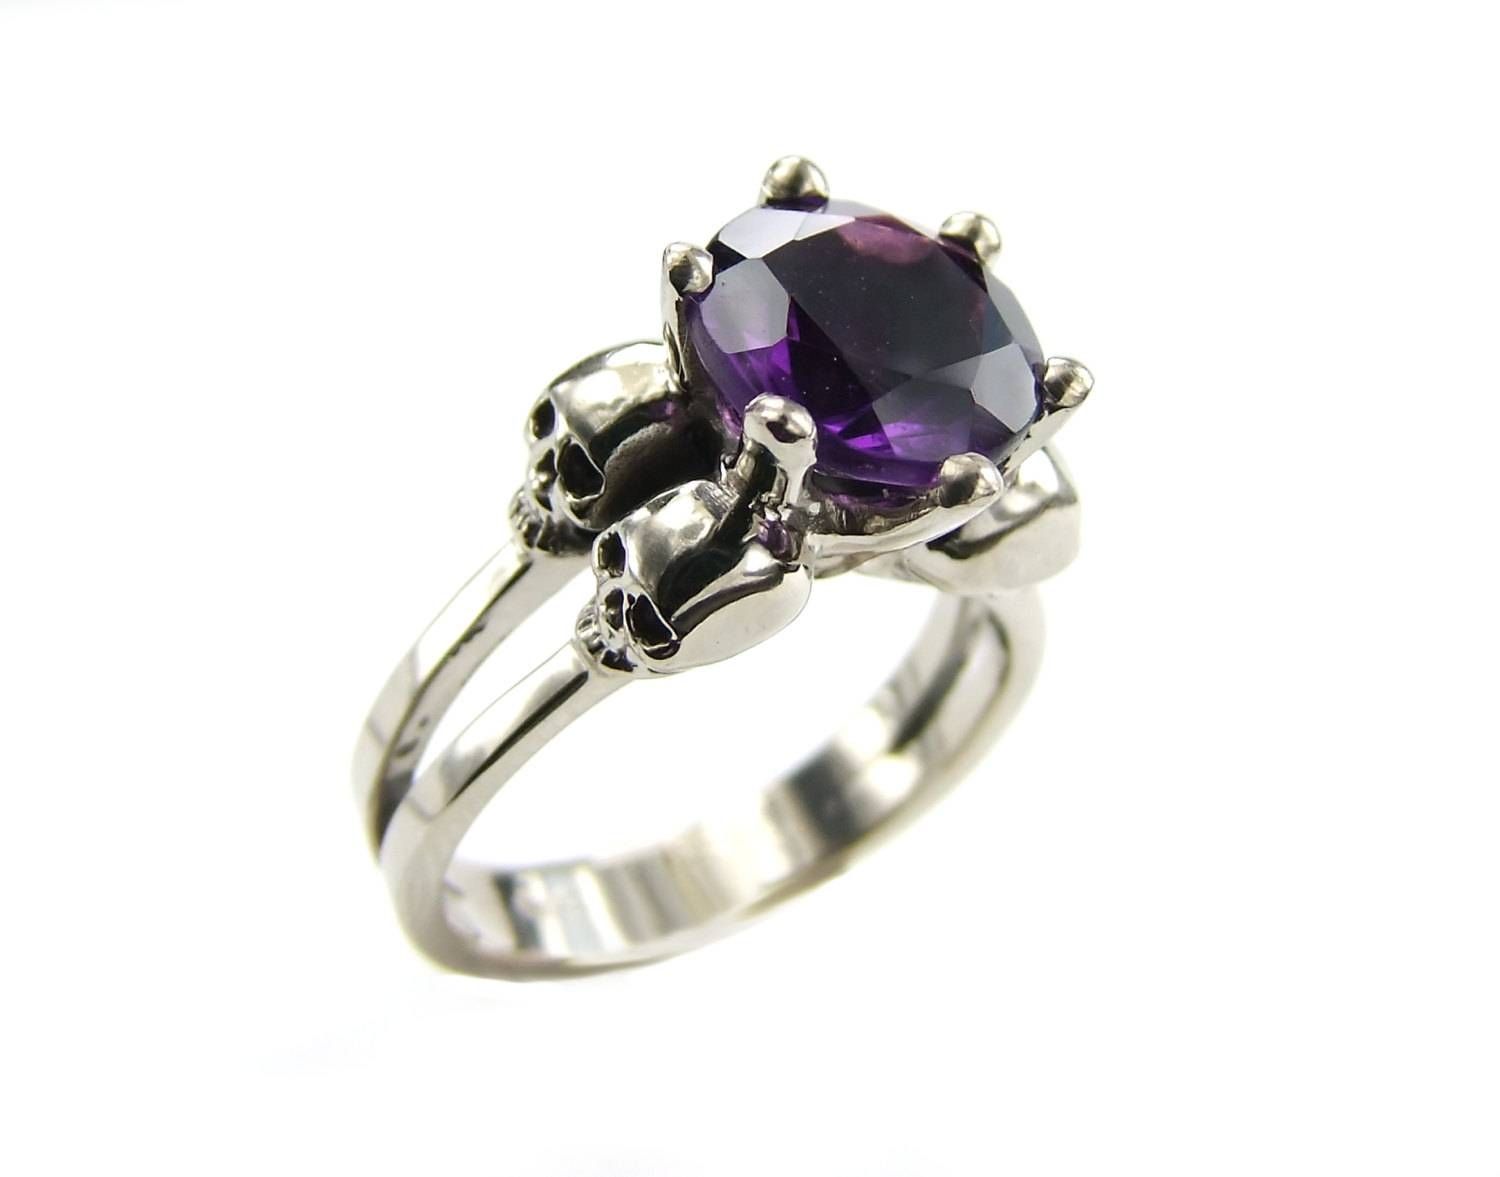 White Gold Skull Ring Goth Engagement Ring Amethyst Within Gothic Engagement Rings For Women (View 1 of 15)